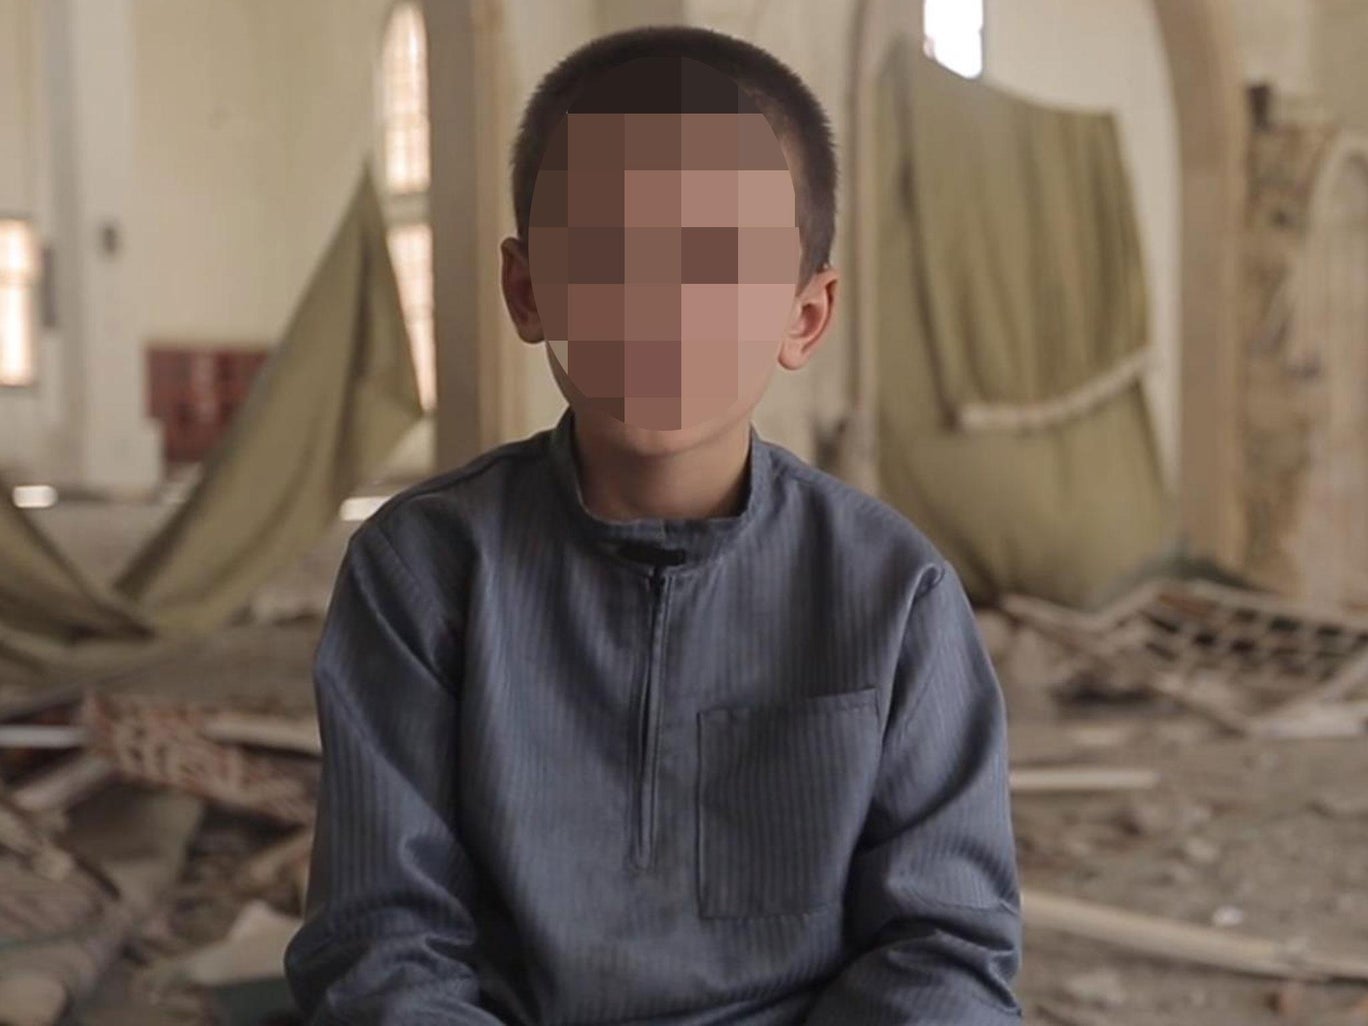 10-year-old Matthew was named as Yusuf in the Isis propaganda video released in August 2017